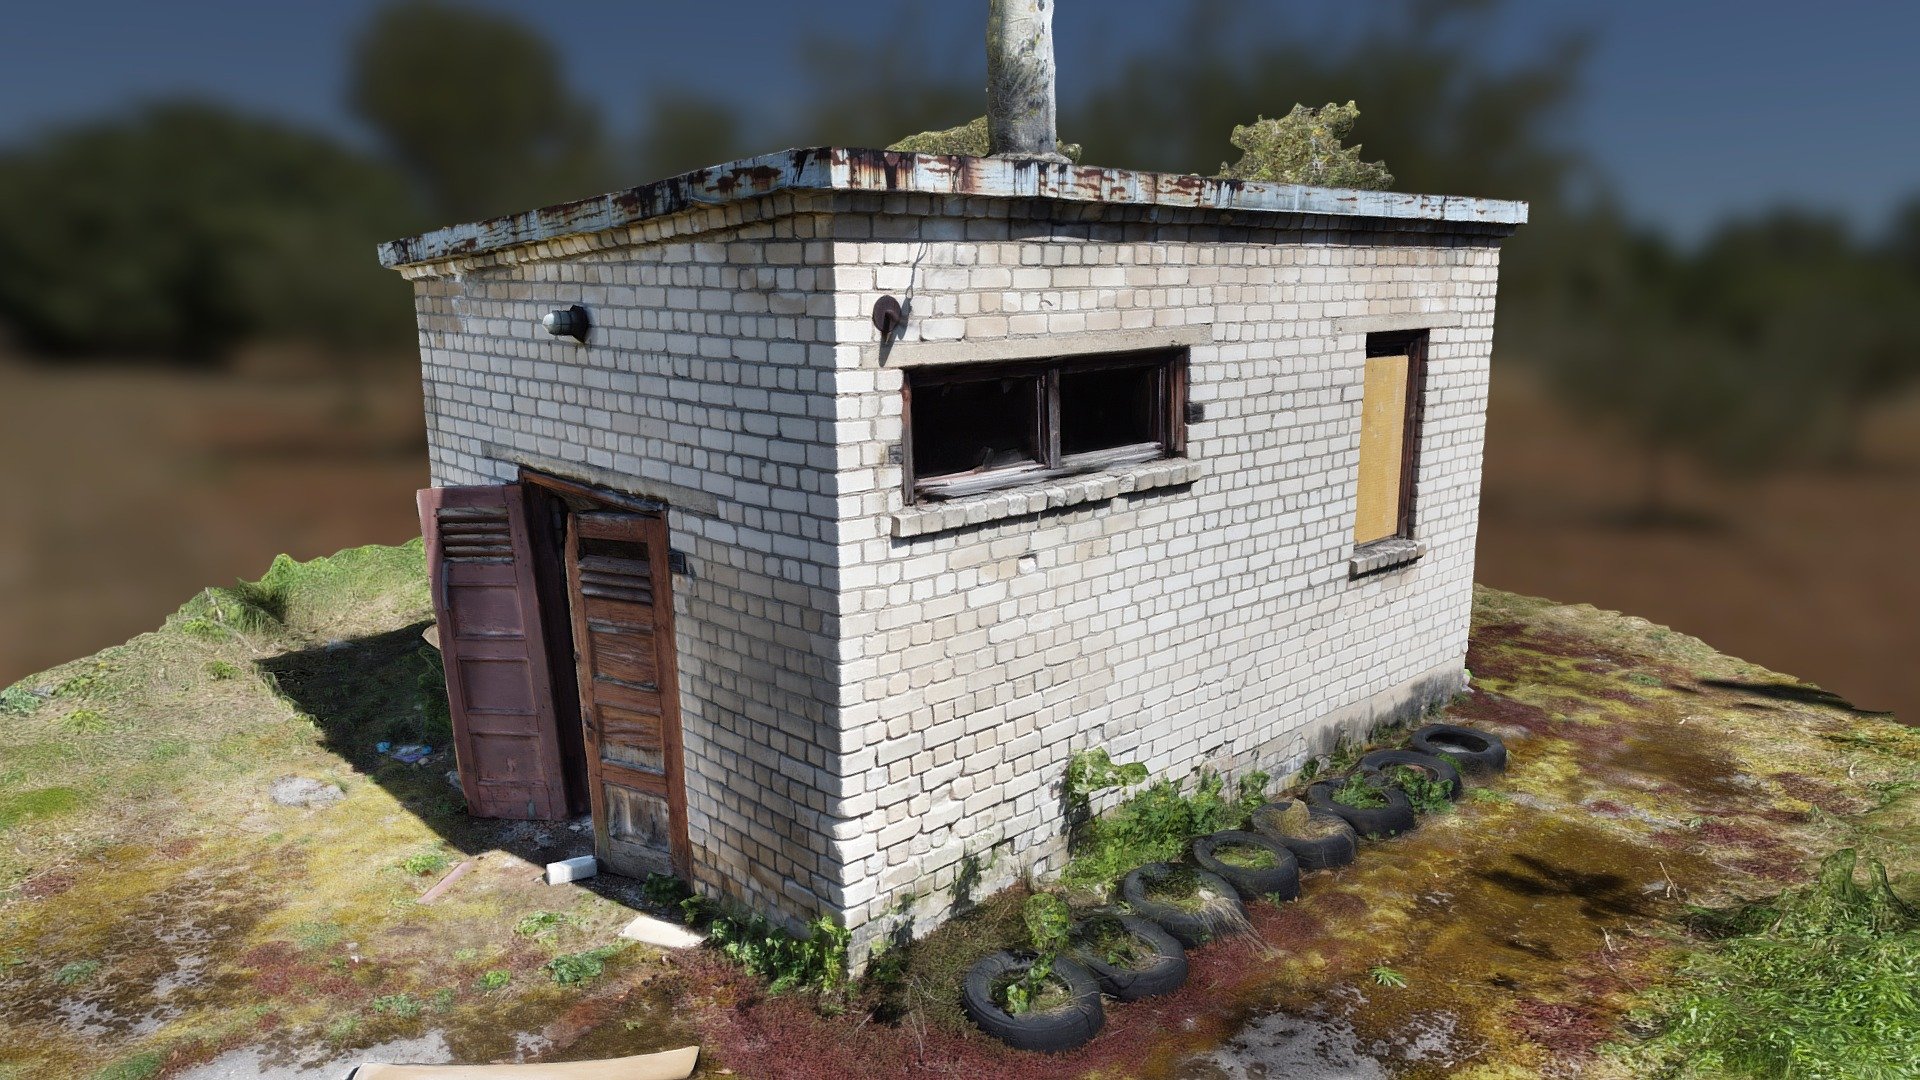 Old, abandoned, small Soviet structure.
White bricks, wooden doors, glass windows, wooden planks in front of some windows.
Chimney, grass, tires 3d model